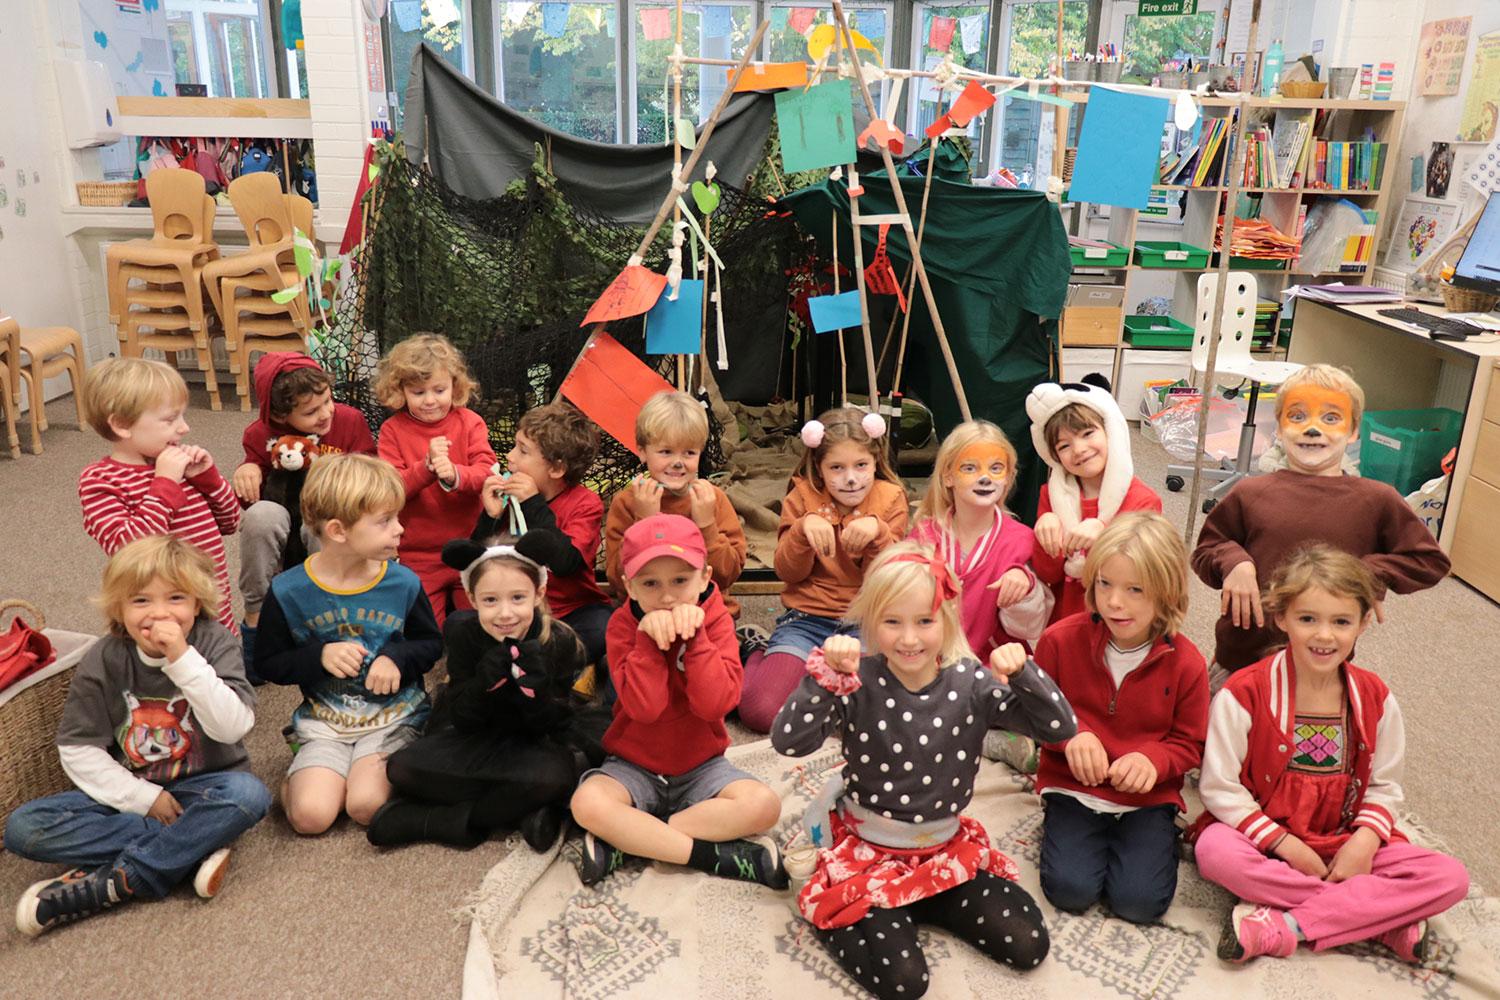 Bedales Pre-prep, Dunannie pupils on Red Panda Day